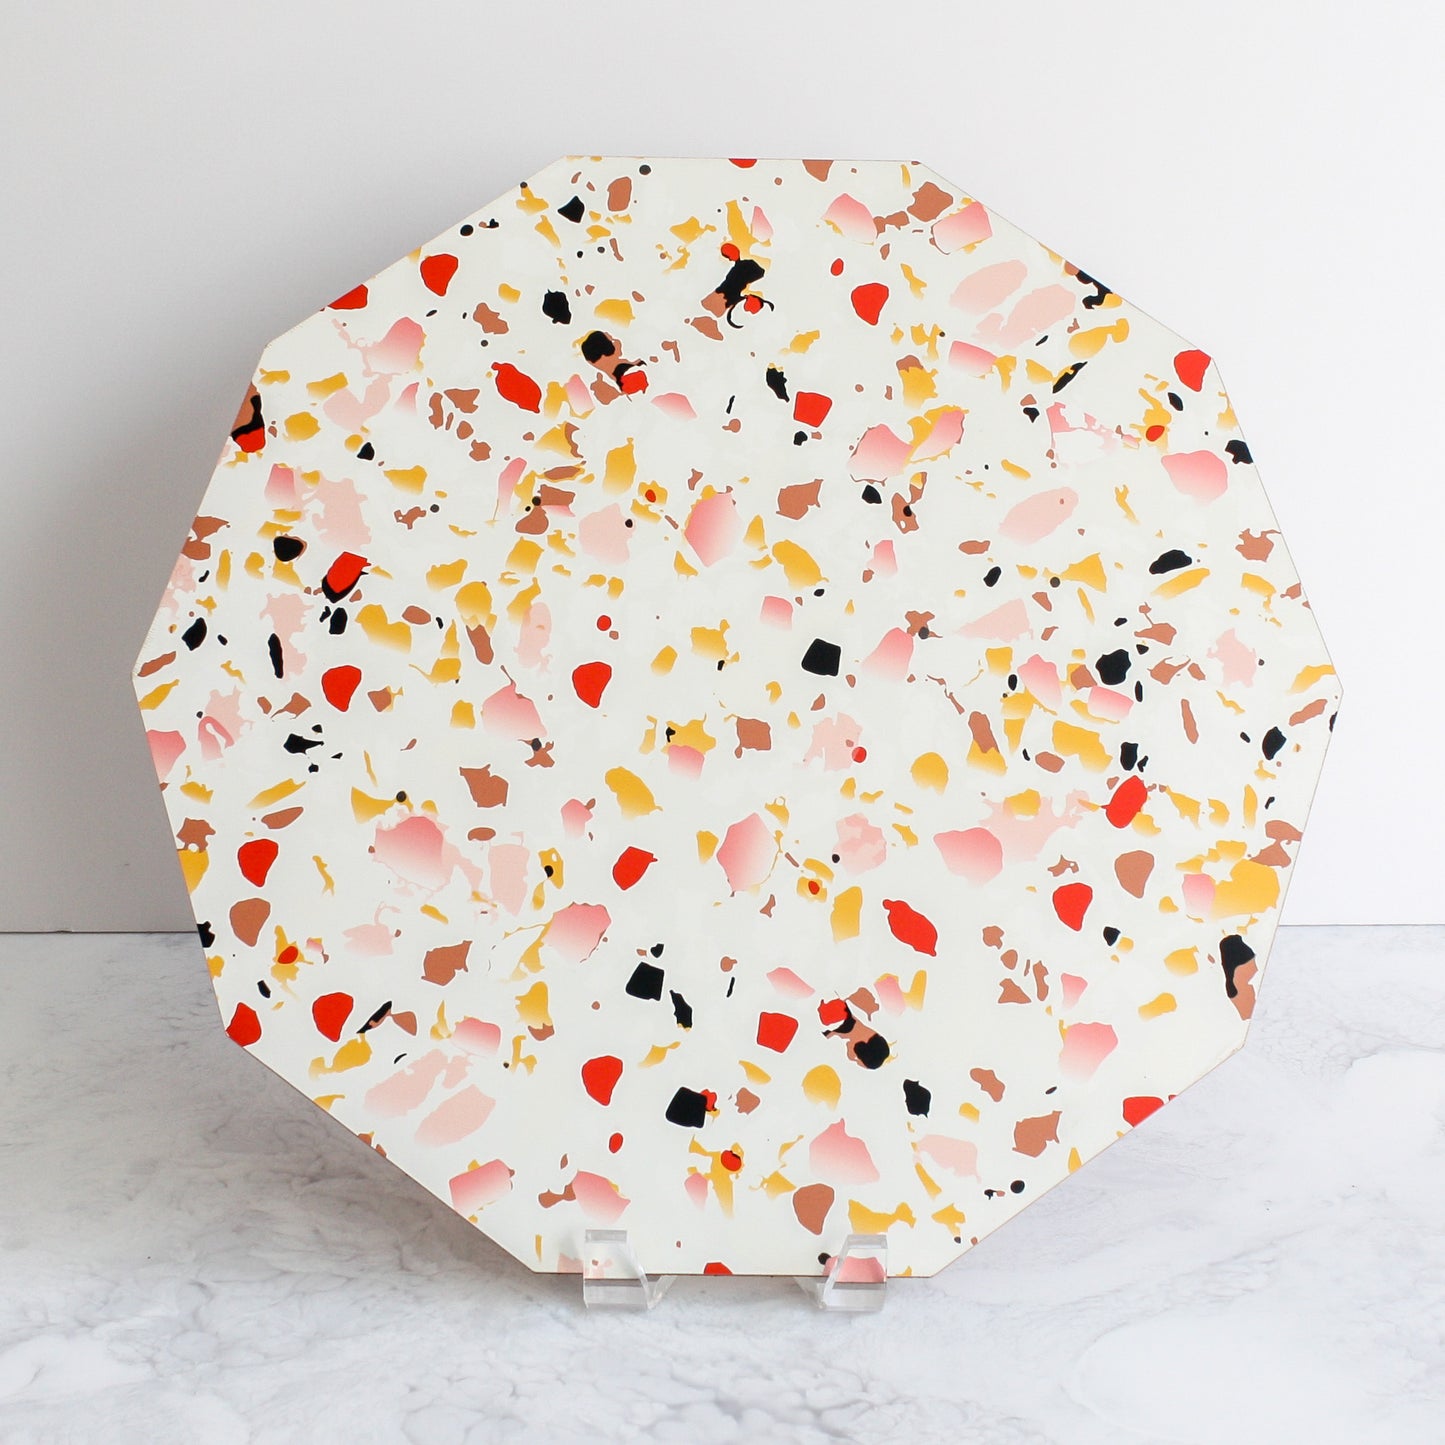 Terrazzo placemats in coral made of cork and wood by Tisch New York